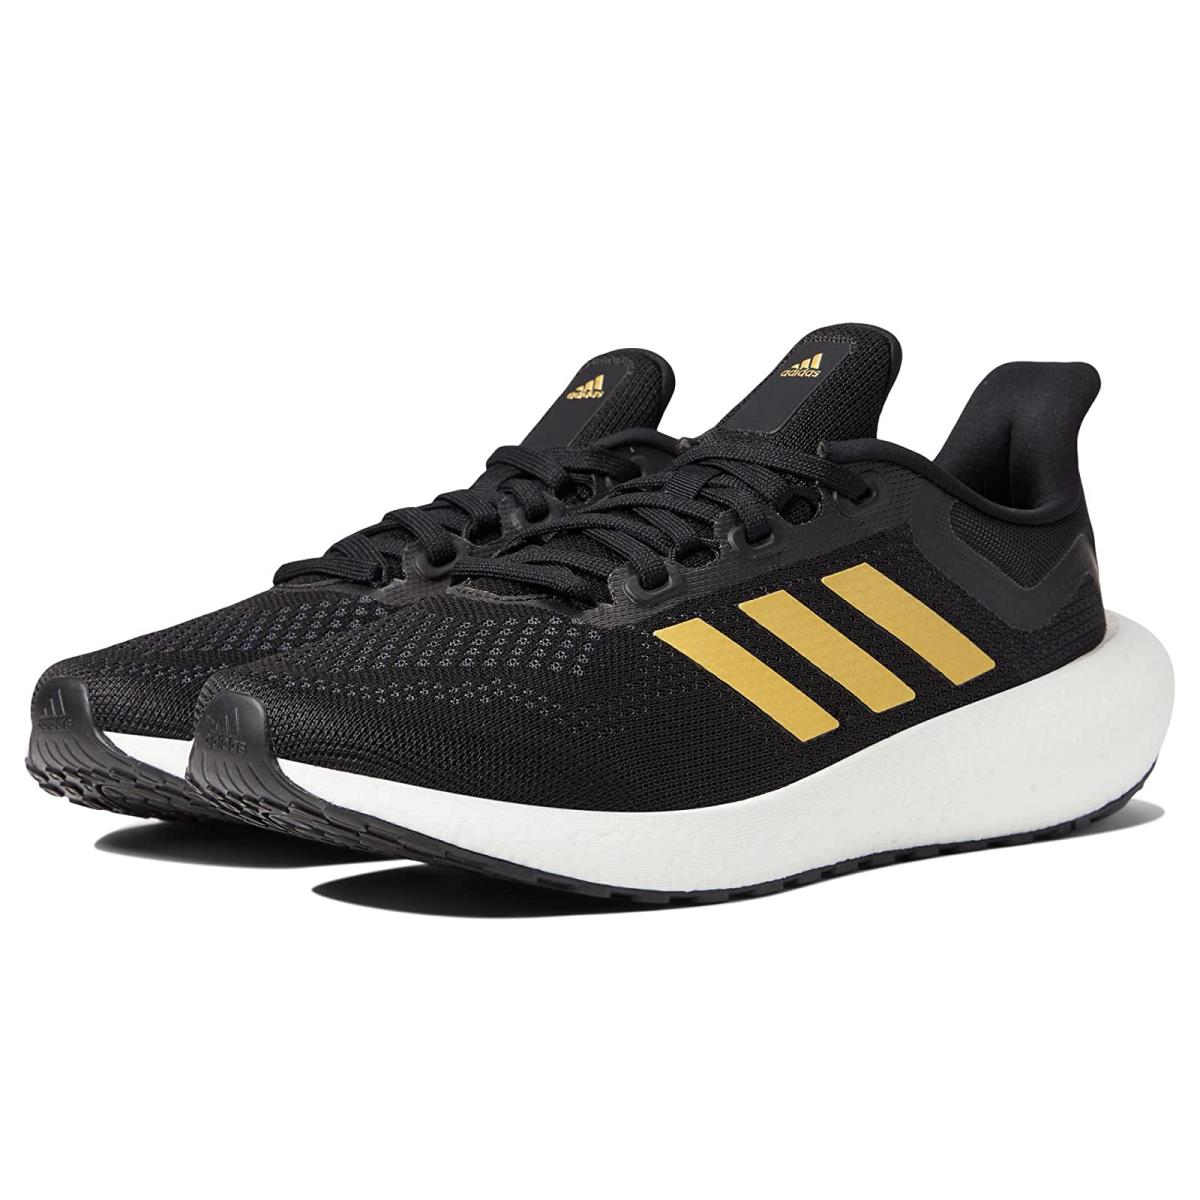 Woman`s Sneakers Athletic Shoes Adidas Running Pureboost Jet Black/Gold Metallic/Carbon